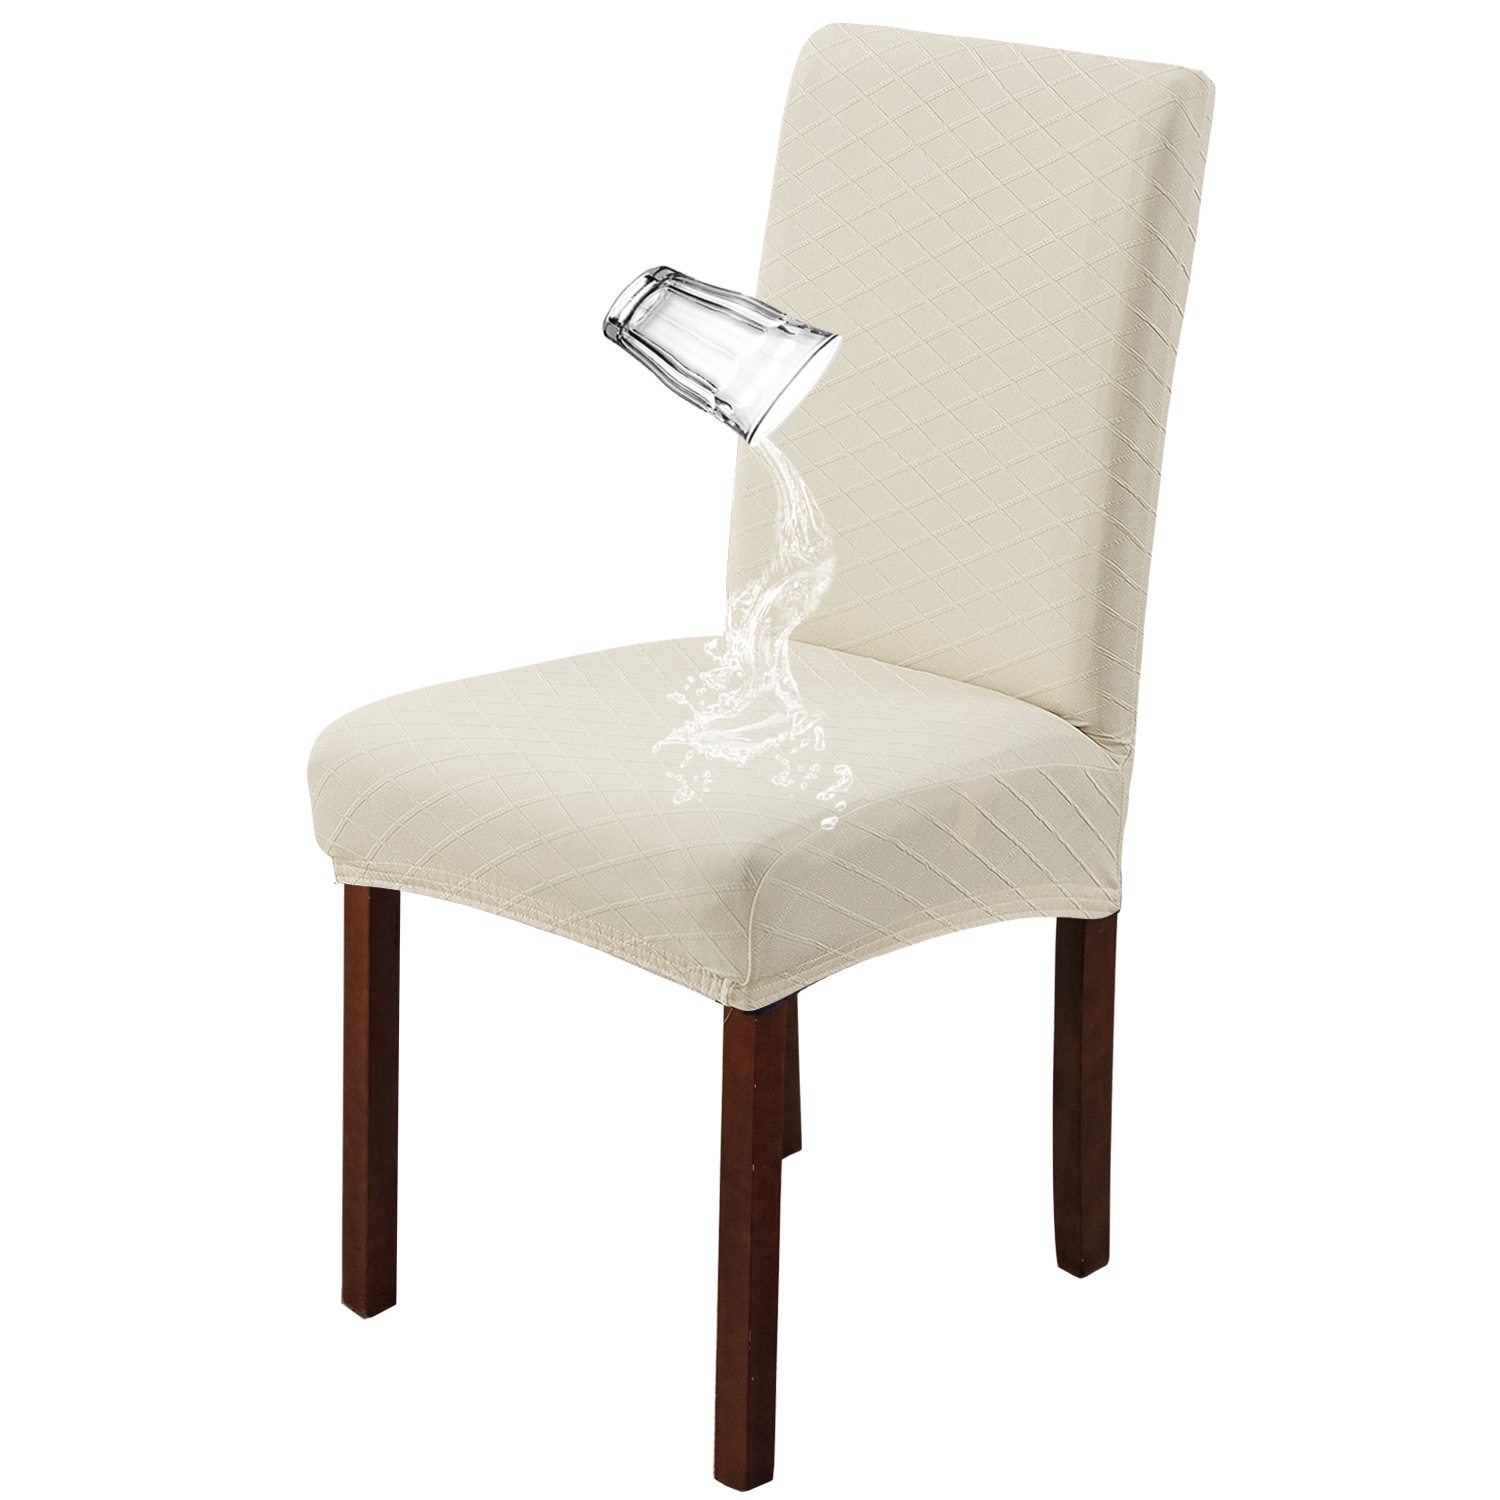 [Elxi] Rhombus Jacquard Waterproof Chair Cover Four Seasons Universal Chair Cover Hotel Restaurant Dining Chair Cover